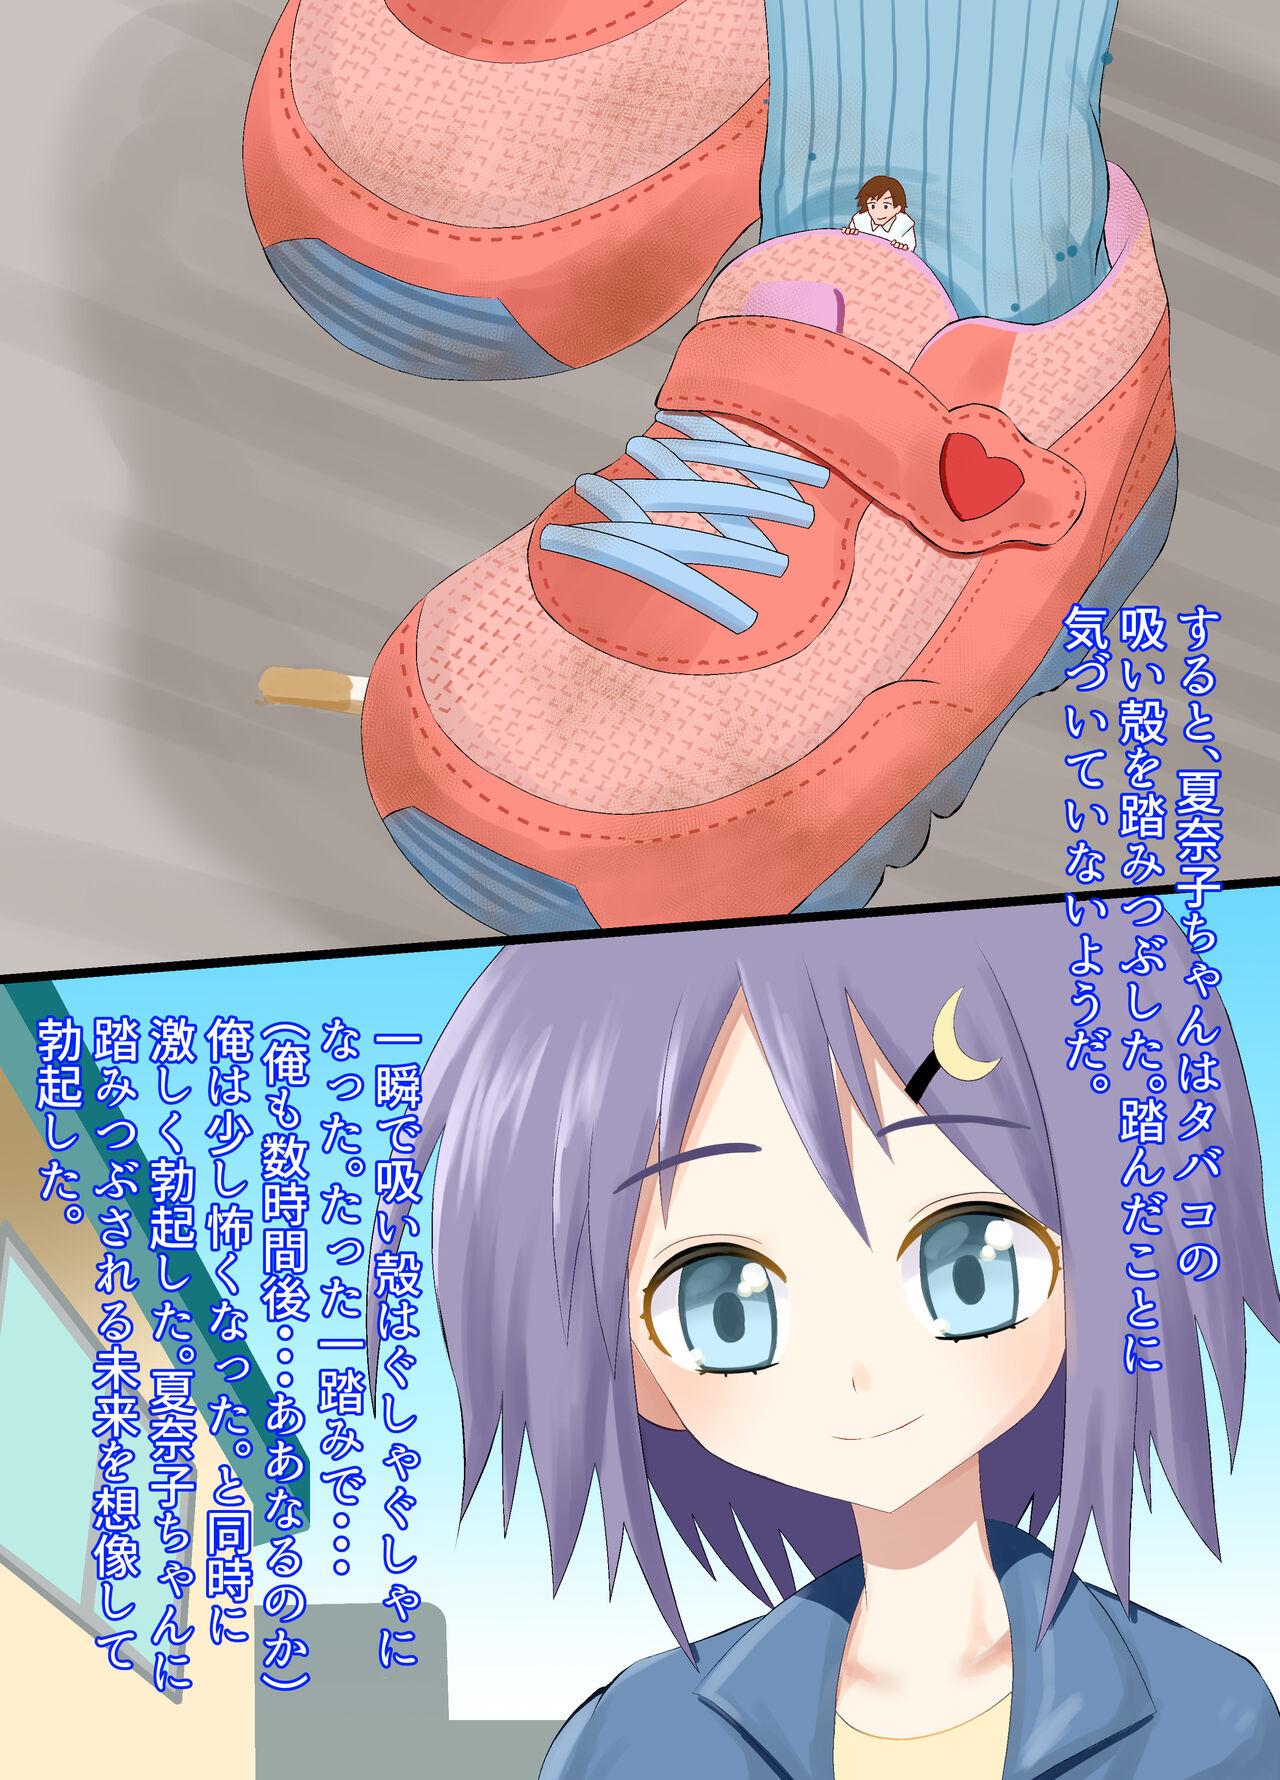 Cumming A CG collection of getting smaller and being stepped on by a girl - Original Dyke - Page 8